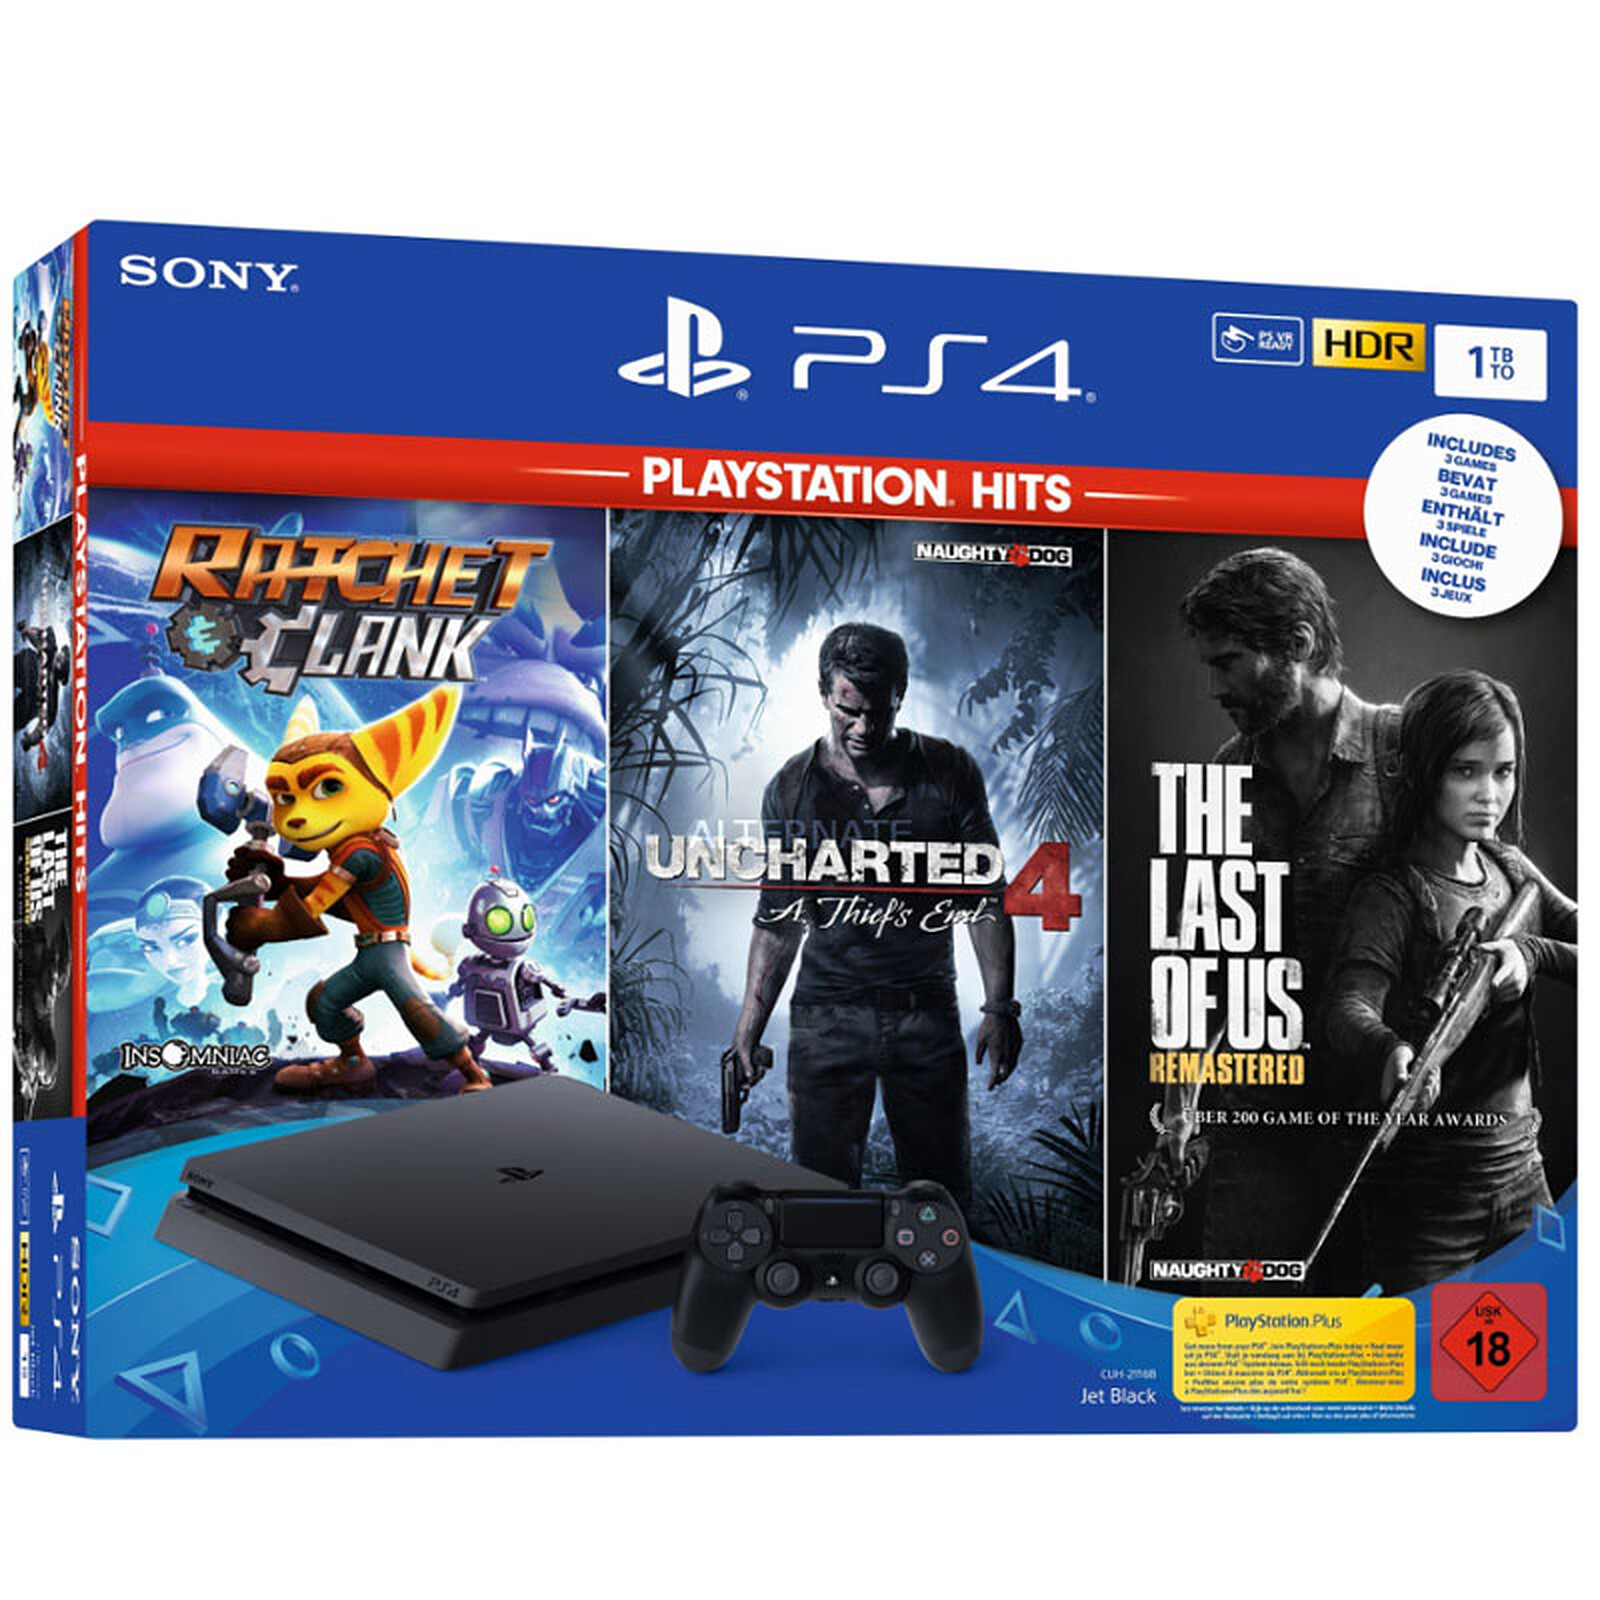 Mujer joven Reconocimiento esclavo Sony PlayStation 4 Slim (1 TB) + The Last of Us + Uncharted 4 + Ratched &  Clank - Sony Interactive Entertainment en LDLC | ¡Musericordia!